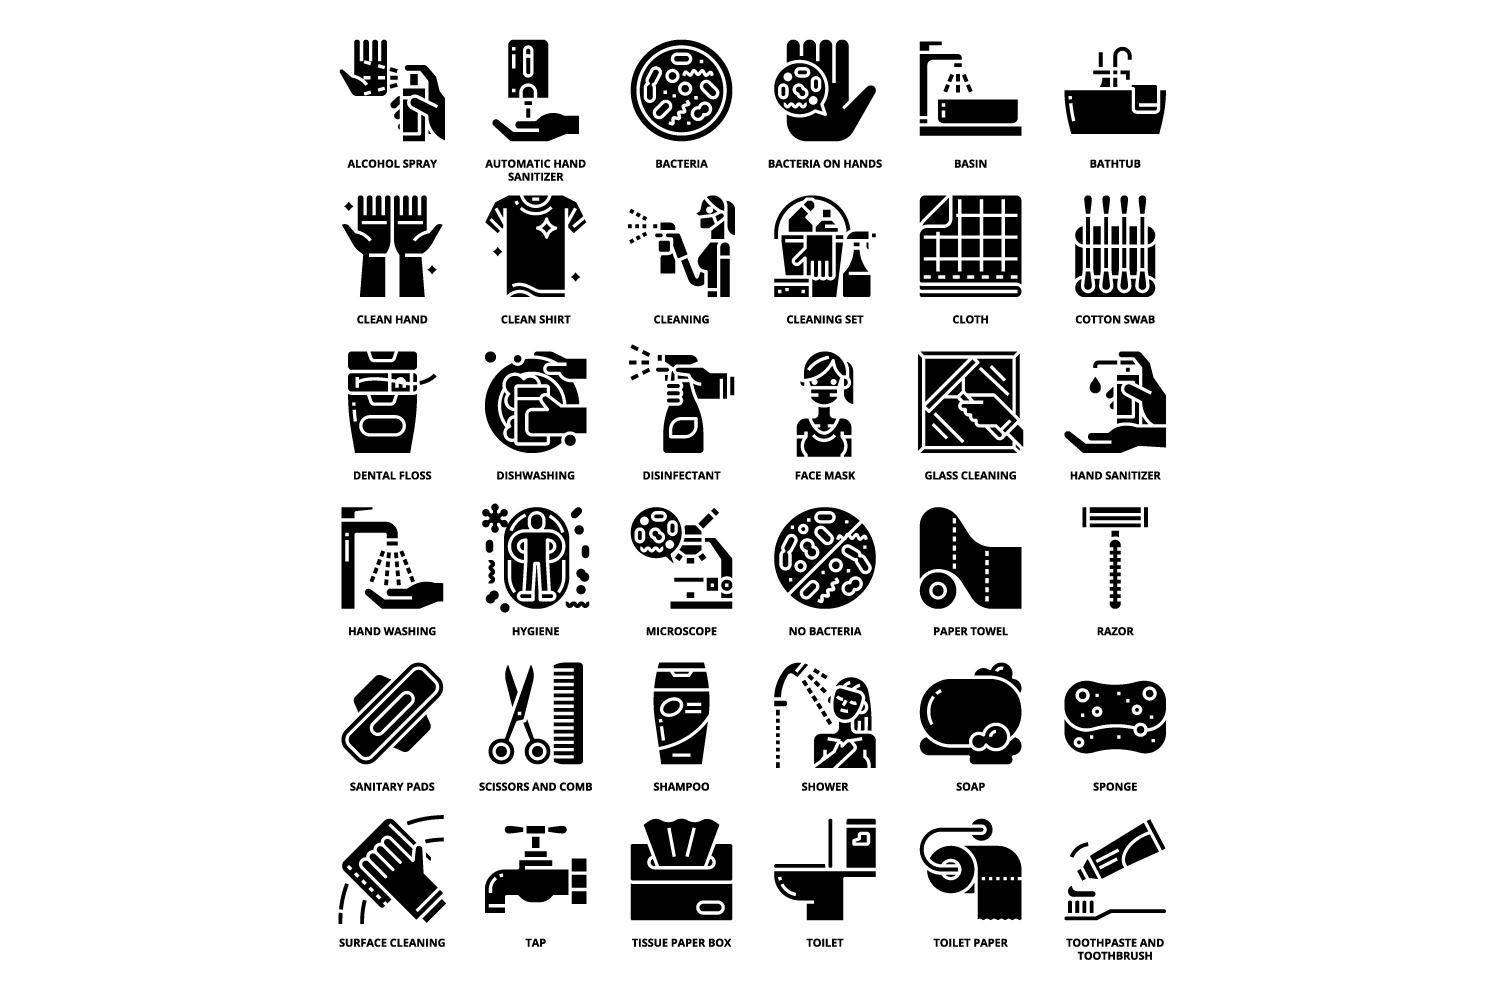 Black and white image of various types of appliances.